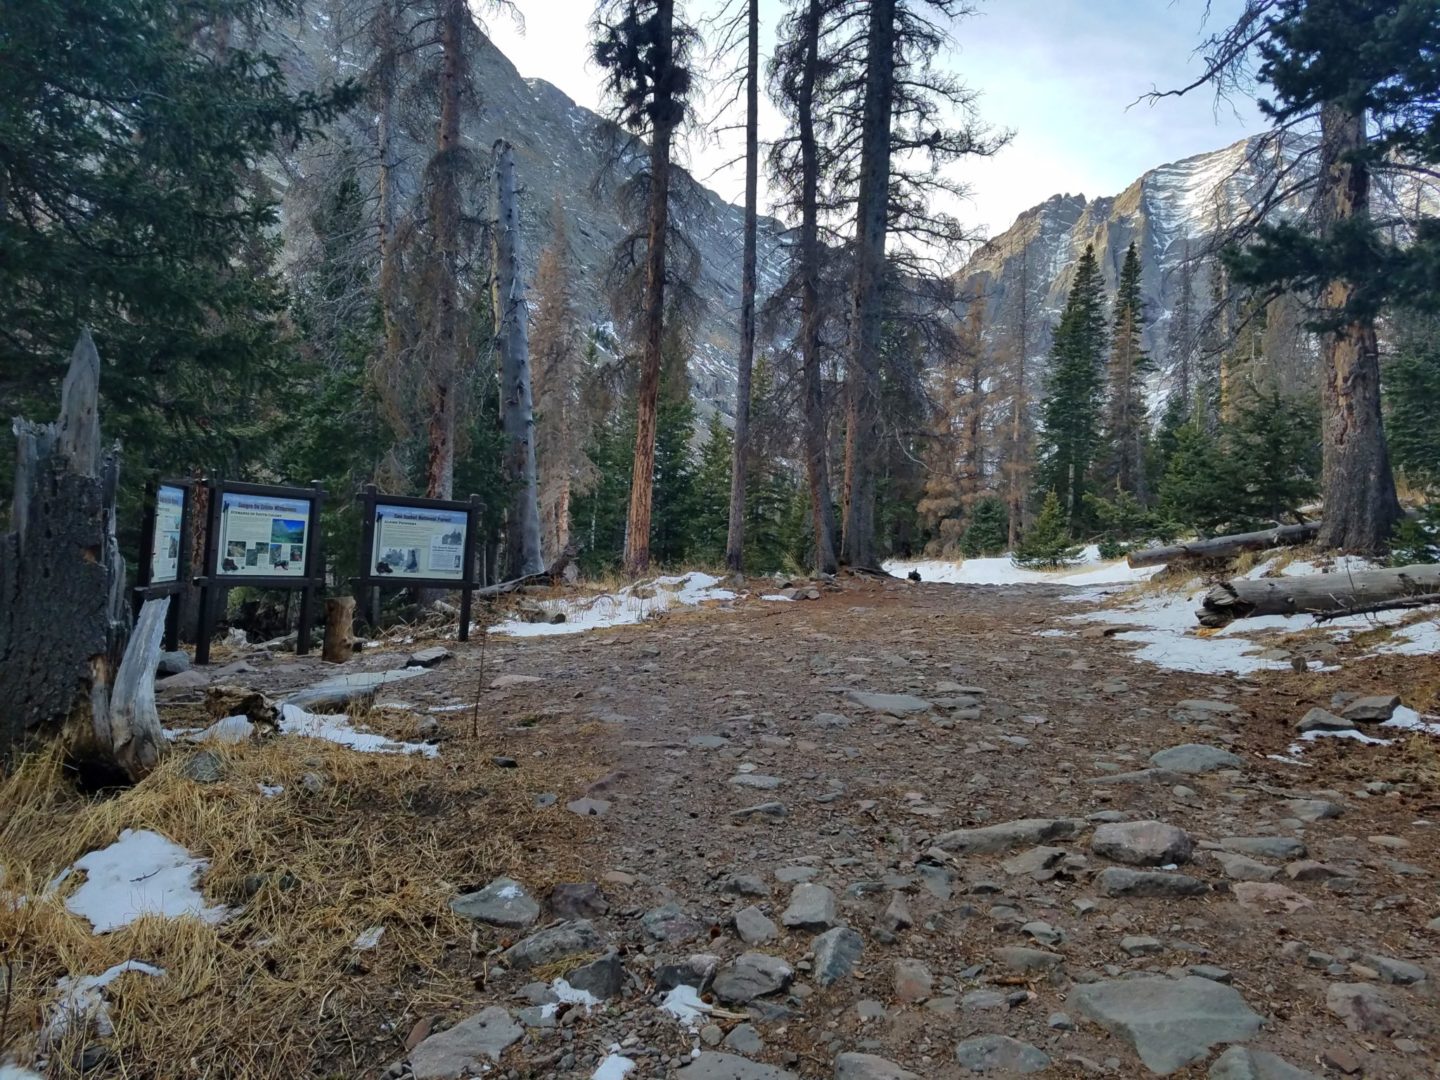 The old upper trailhead, now permanently closed